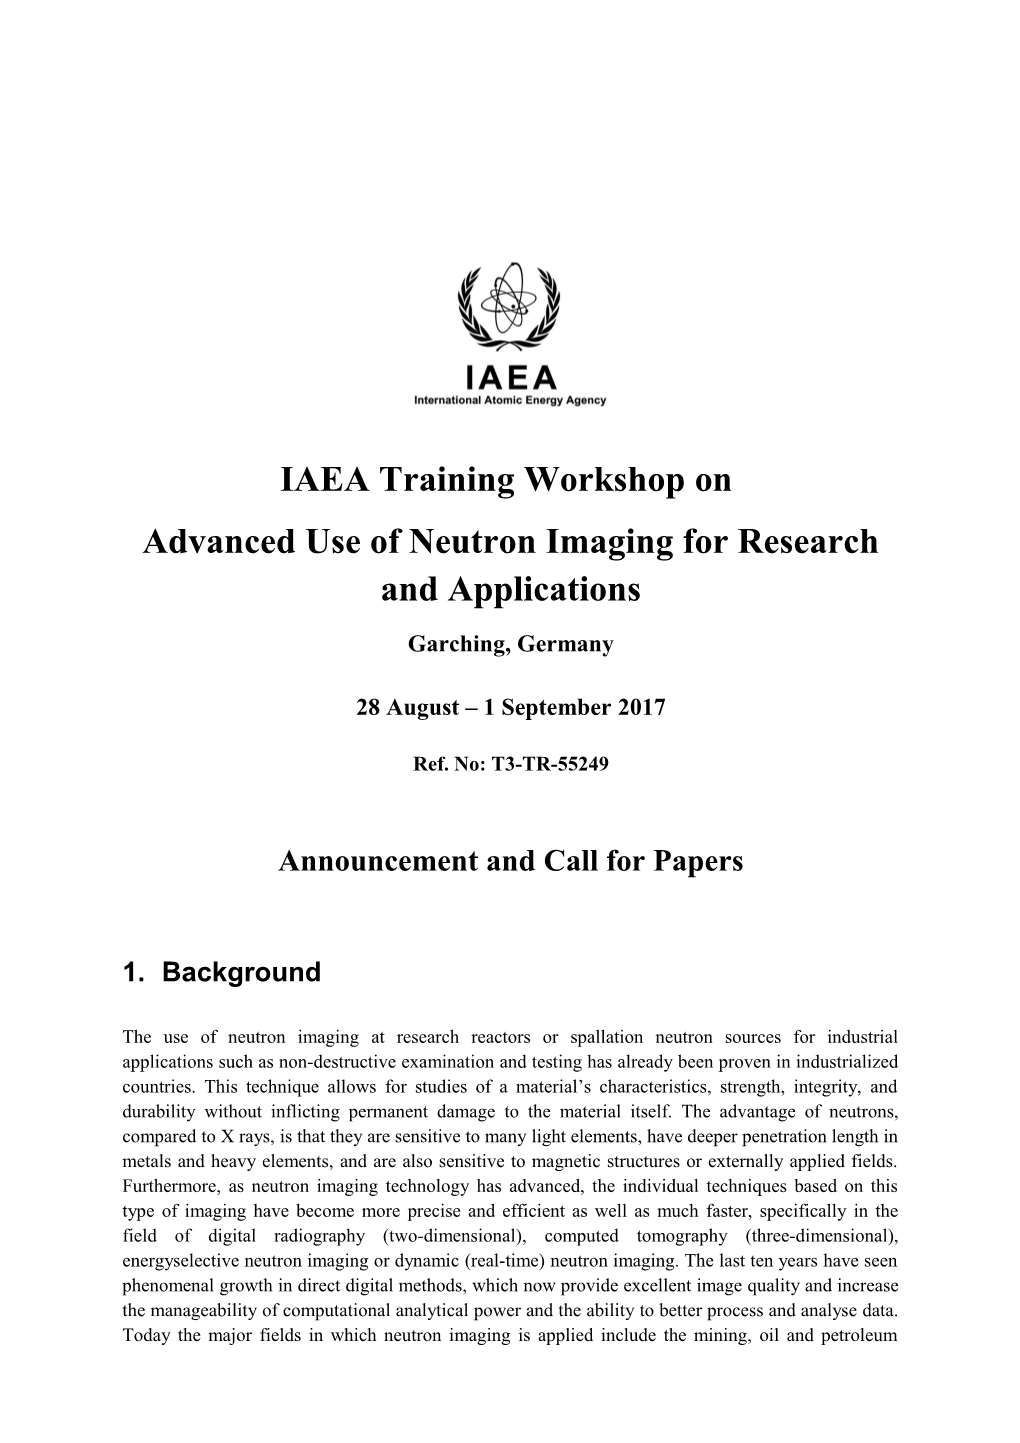 Advanced Use of Neutron Imaging for Research and Applications